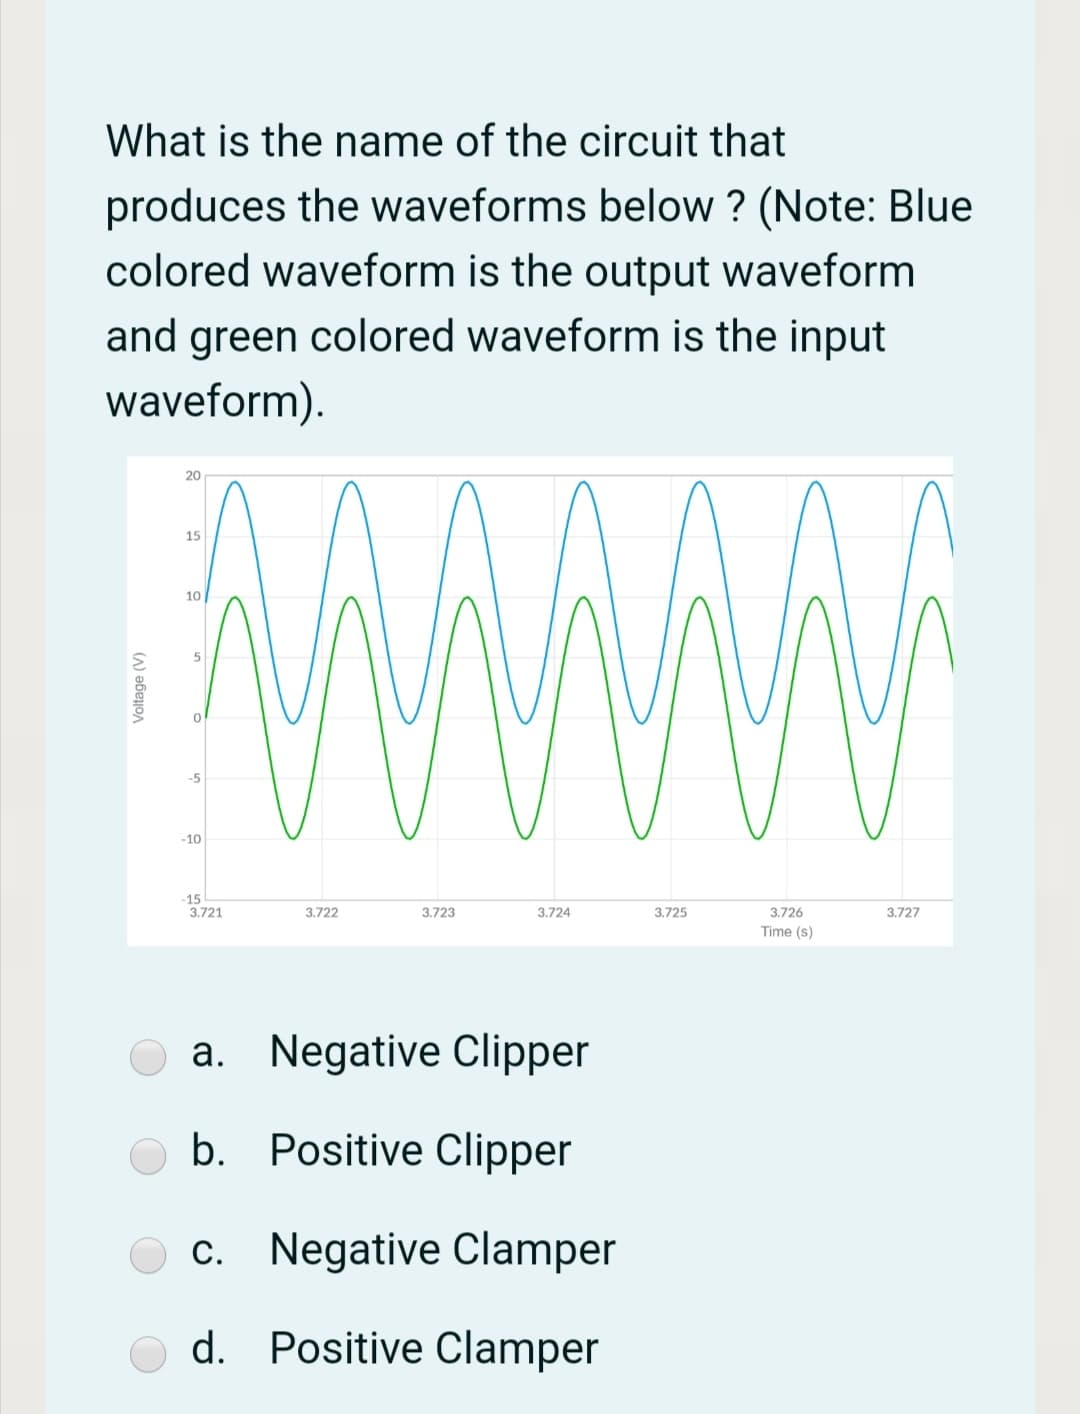 What is the name of the circuit that
produces the waveforms below ? (Note: Blue
colored waveform is the output waveform
and green colored waveform is the input
waveform).
20
15
10
-5
-10
-15
3.721
3.722
3.723
3.724
3.725
3.726
3.727
Time (s)
a. Negative Clipper
b. Positive Clipper
c. Negative Clamper
d. Positive Clamper
Voltage (V)
